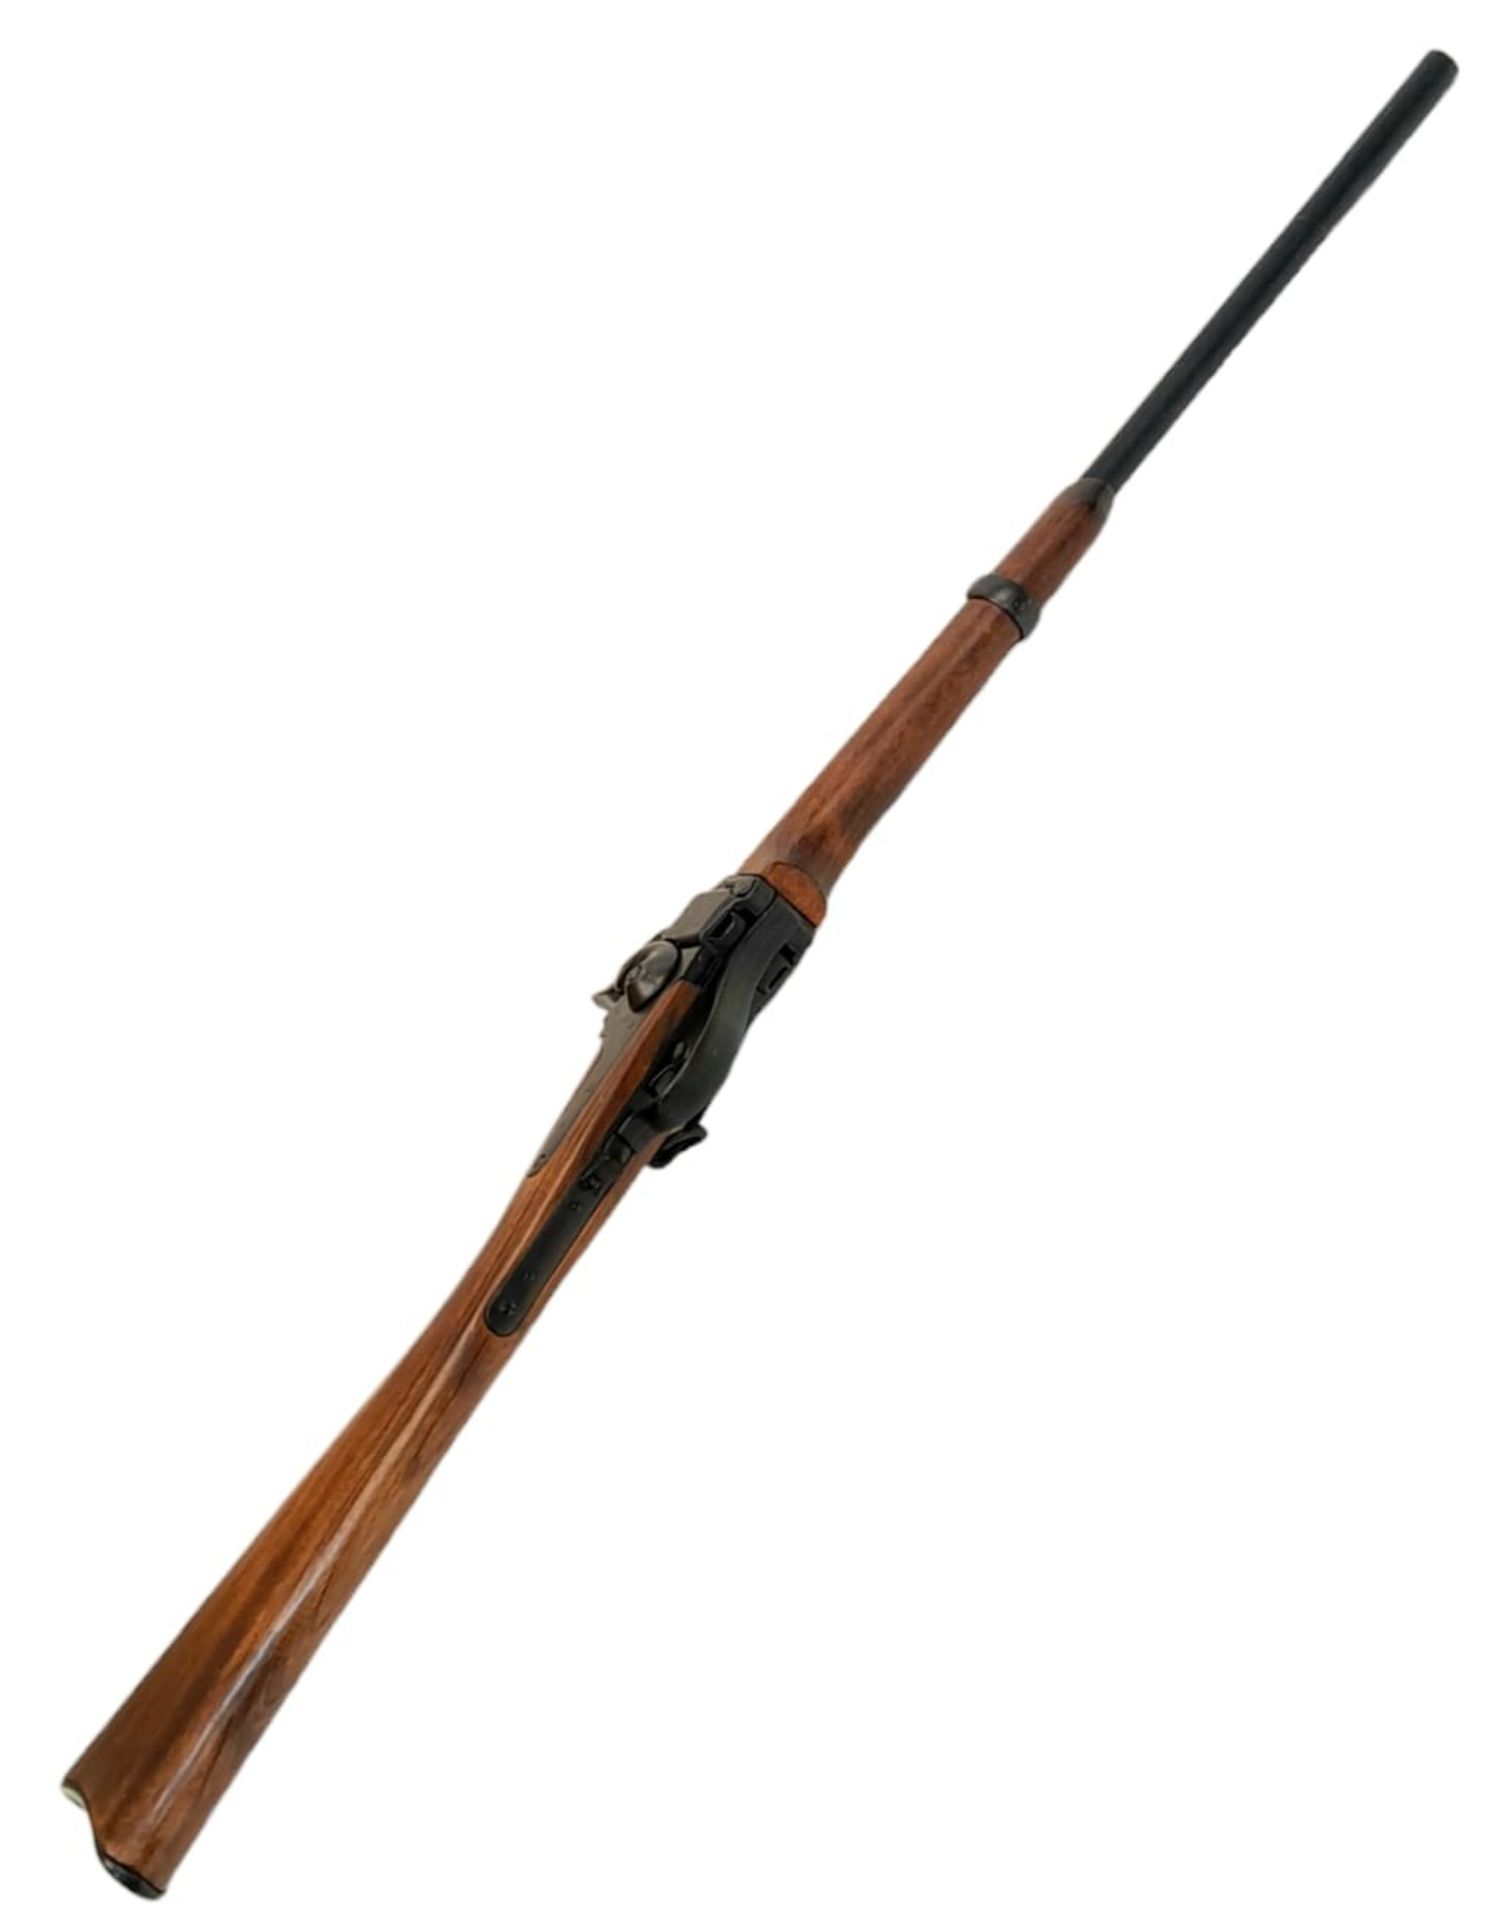 A Vintage, Full Weight and Size, Retrospective Inert Replica of an 1859 Carbine Rifle. Wood and - Image 6 of 11